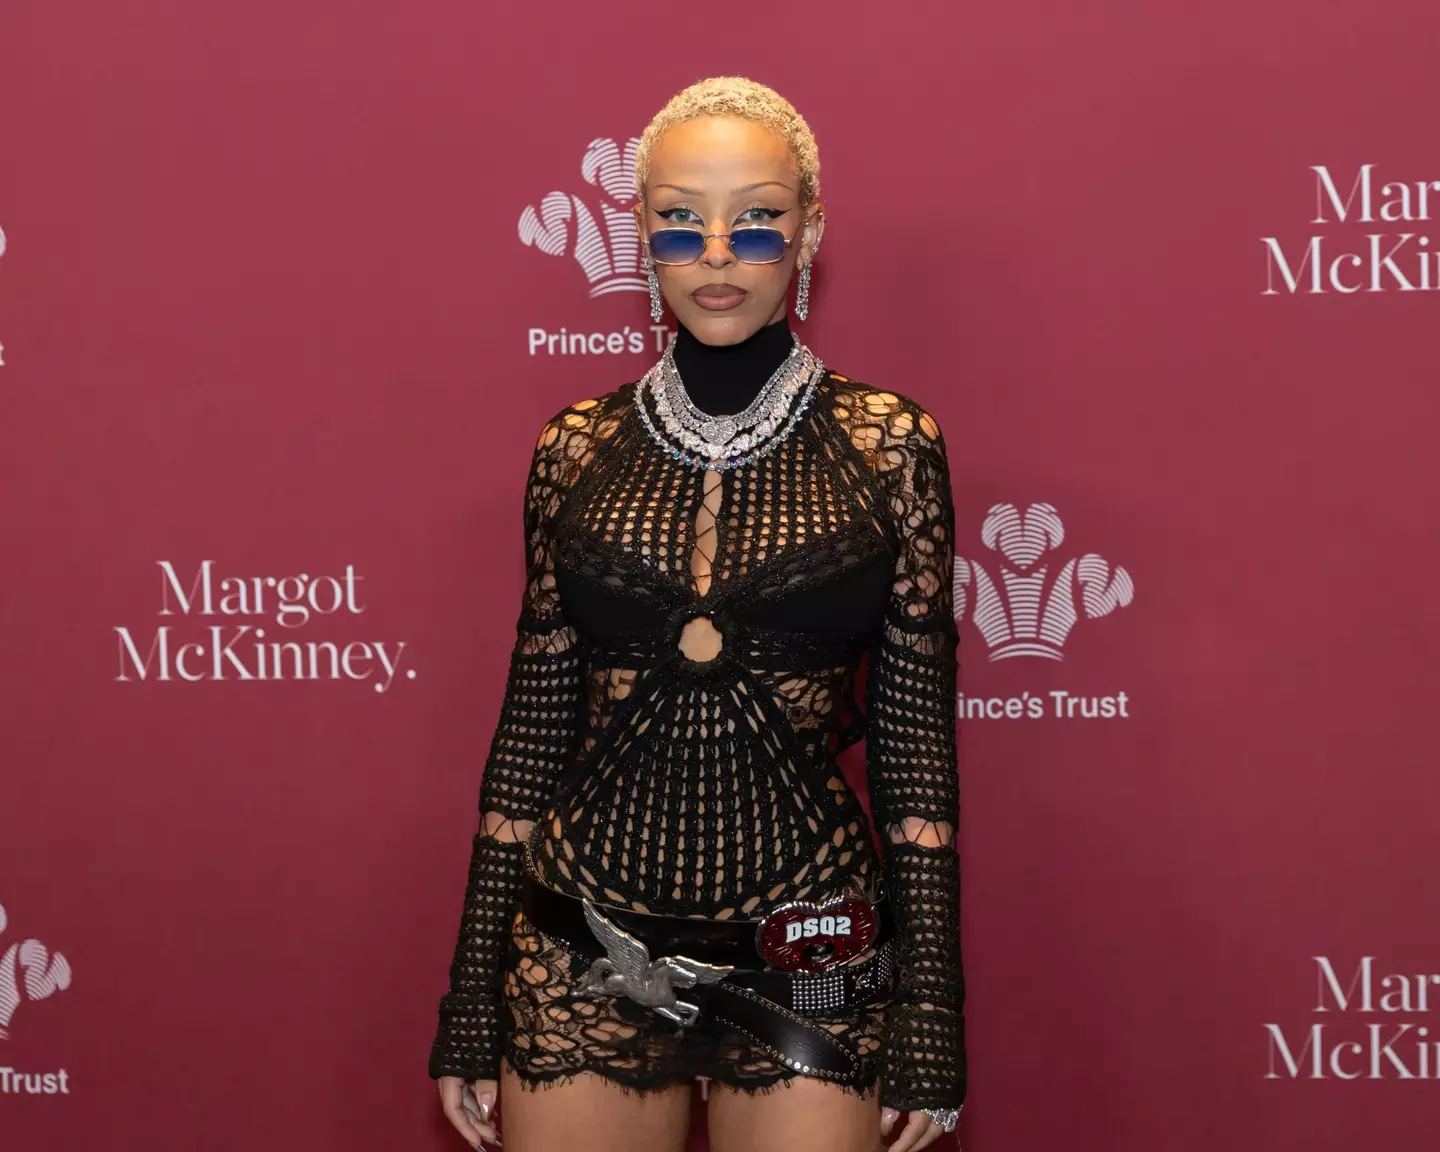 Doja Cat has a harsh response for fans over the weekend.